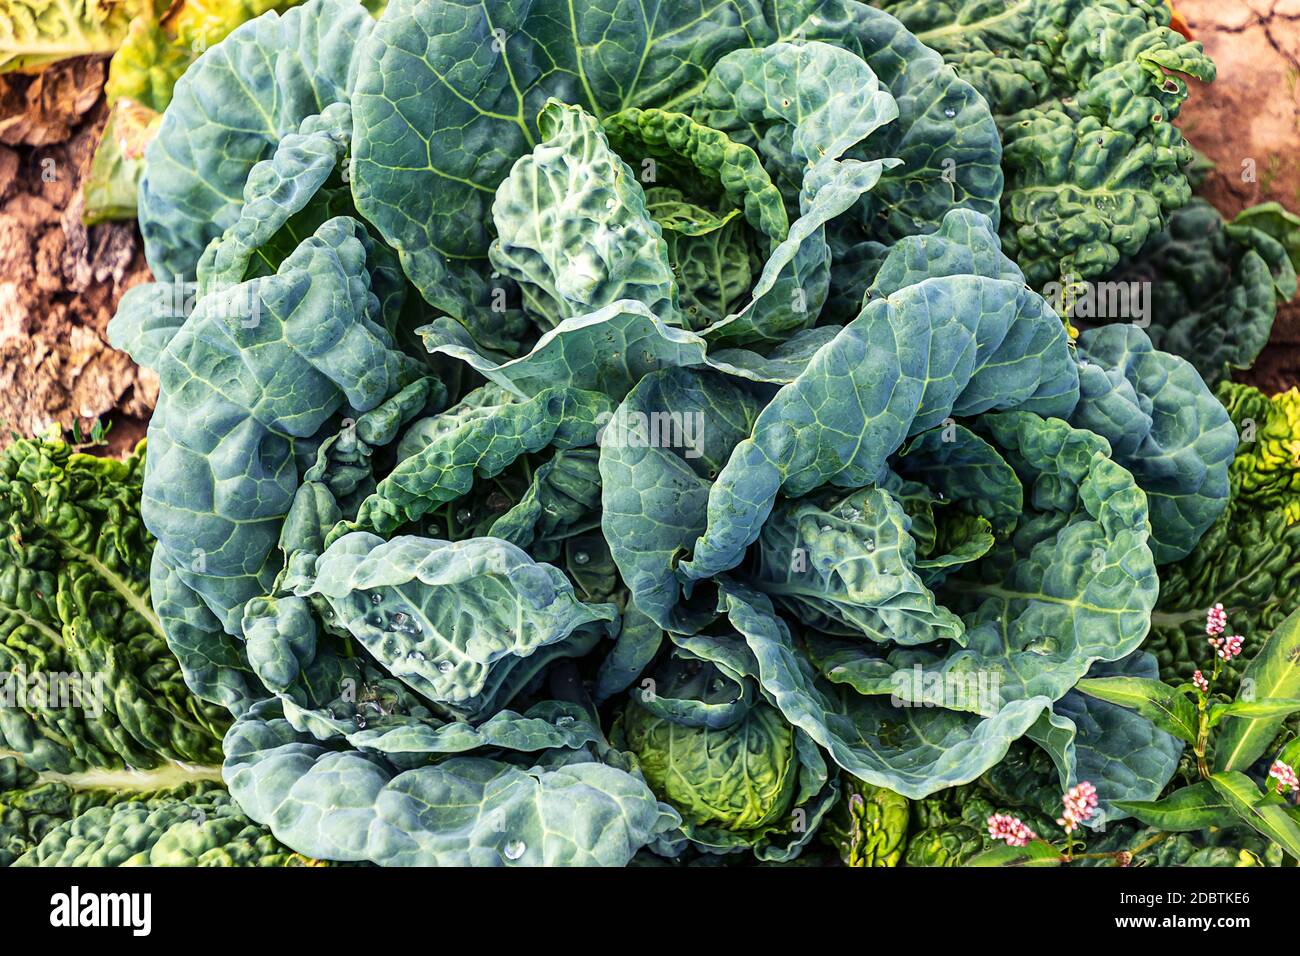 Vegetable background - Beautiful blue and green savoy cabbage head growing in a field in midsummer. Stock Photo